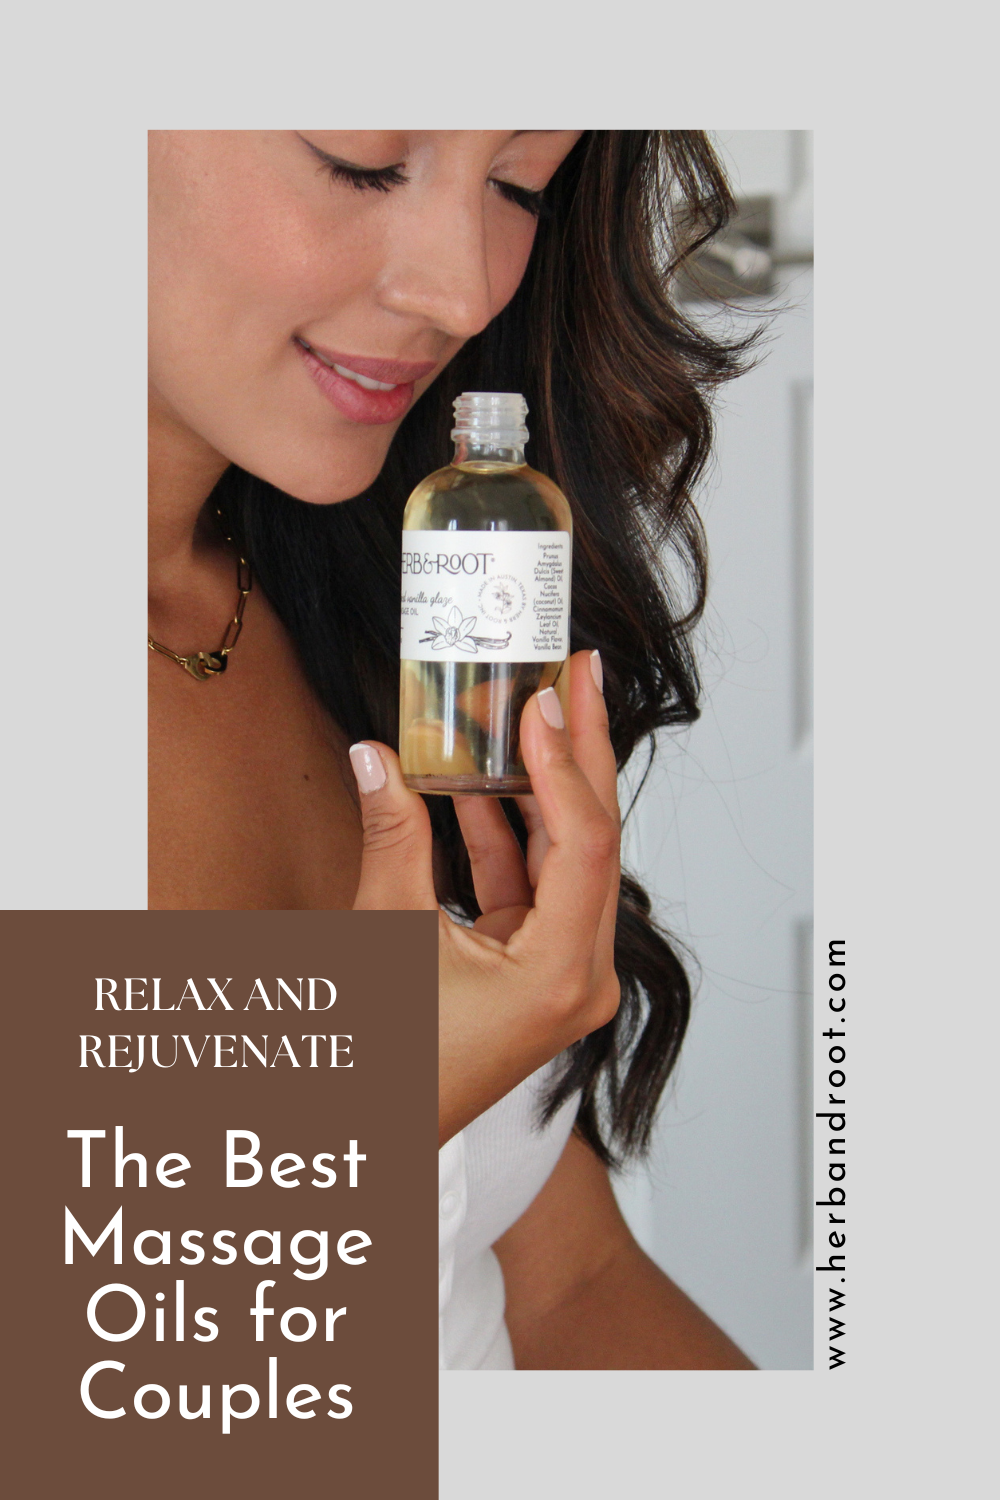 Relax and Rejuvenate with the Best Massage Oils for Couples